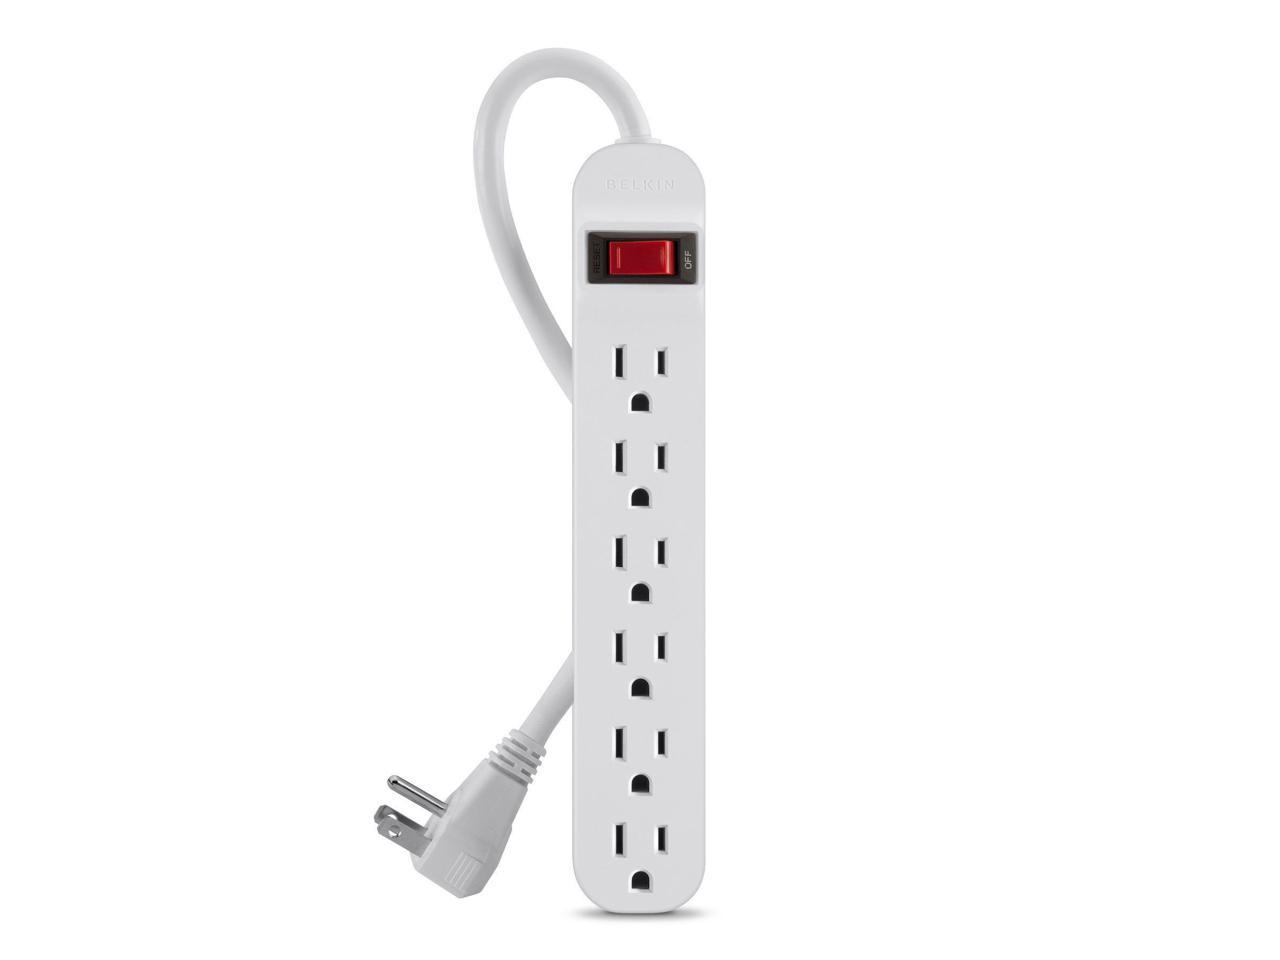 belkin 6outlet power strip with 5foot rightangled power plug f9p60905rdp